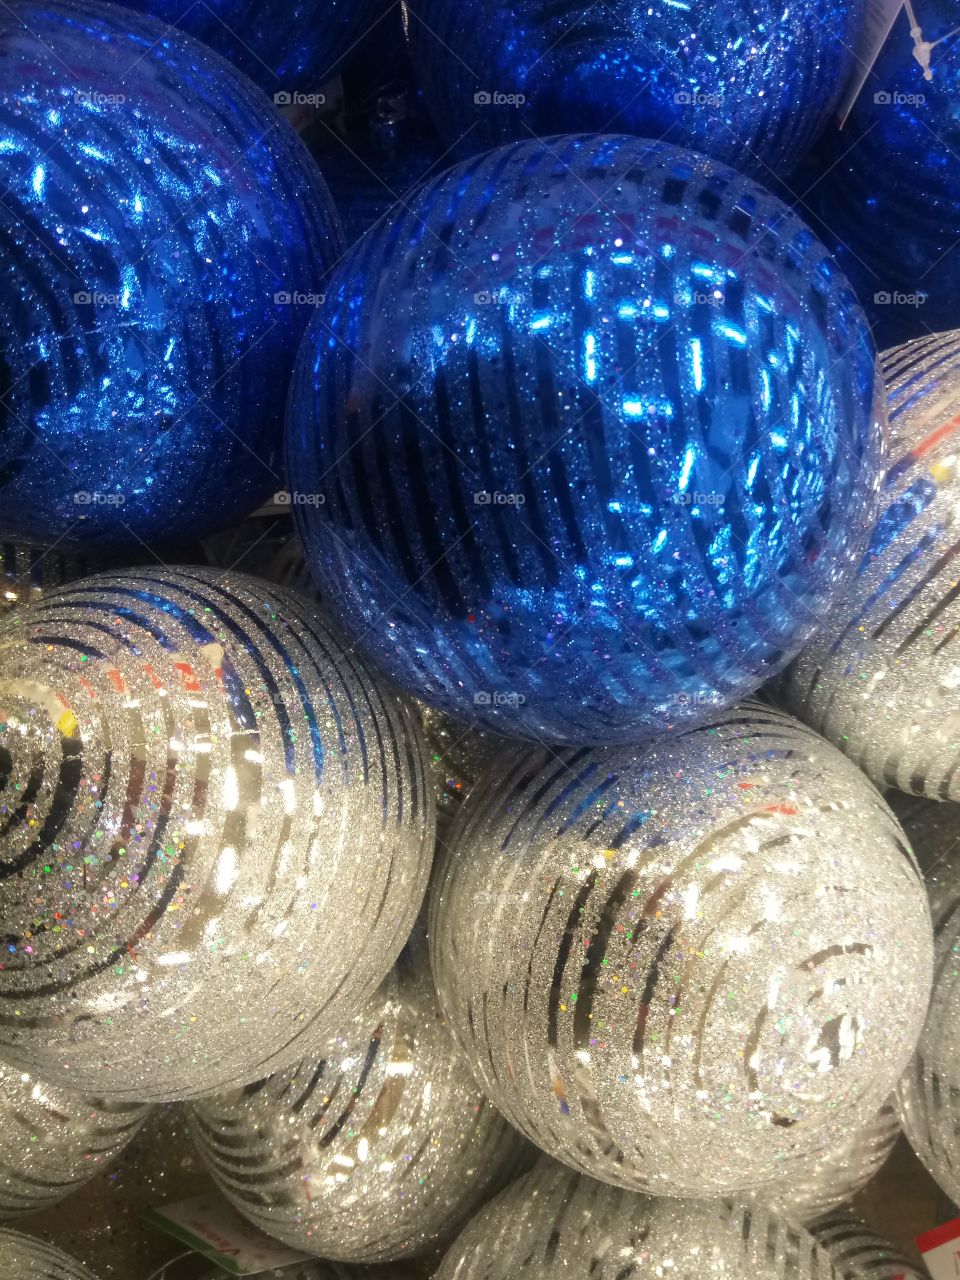 Blue and silver Balls